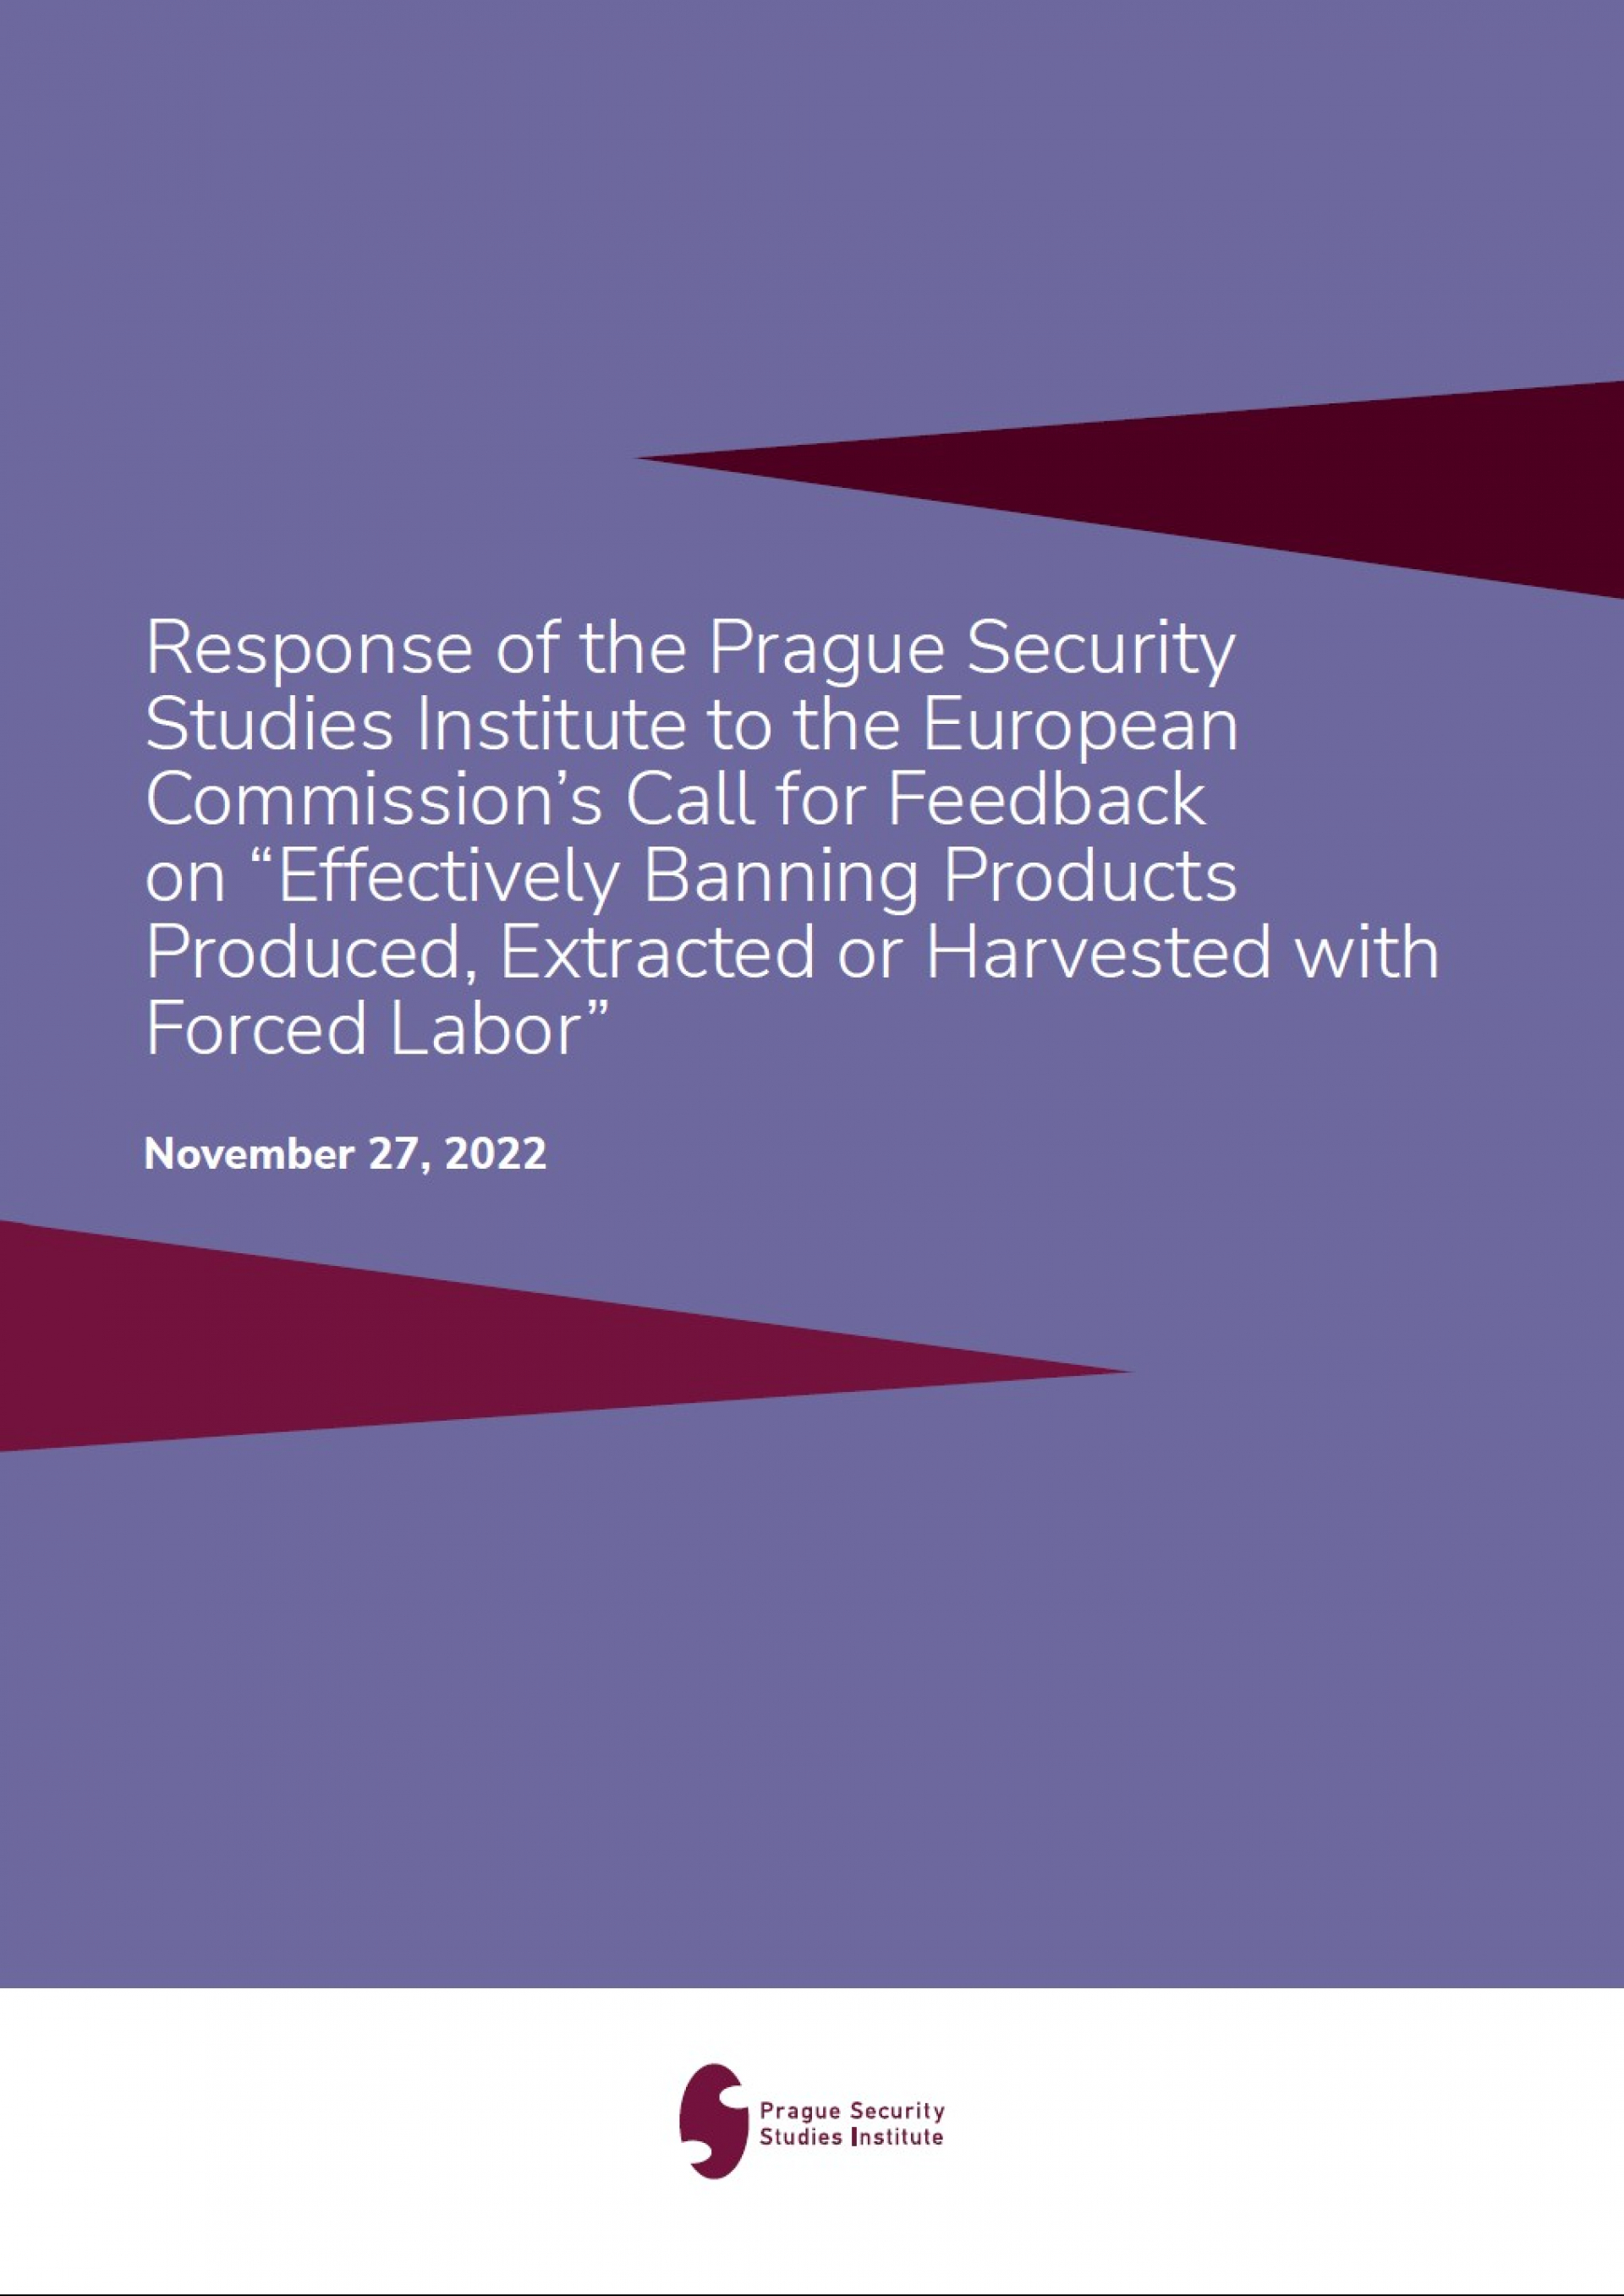 Response of the Prague Security Studies Institute to the European Commission’s Call for Feedback on 